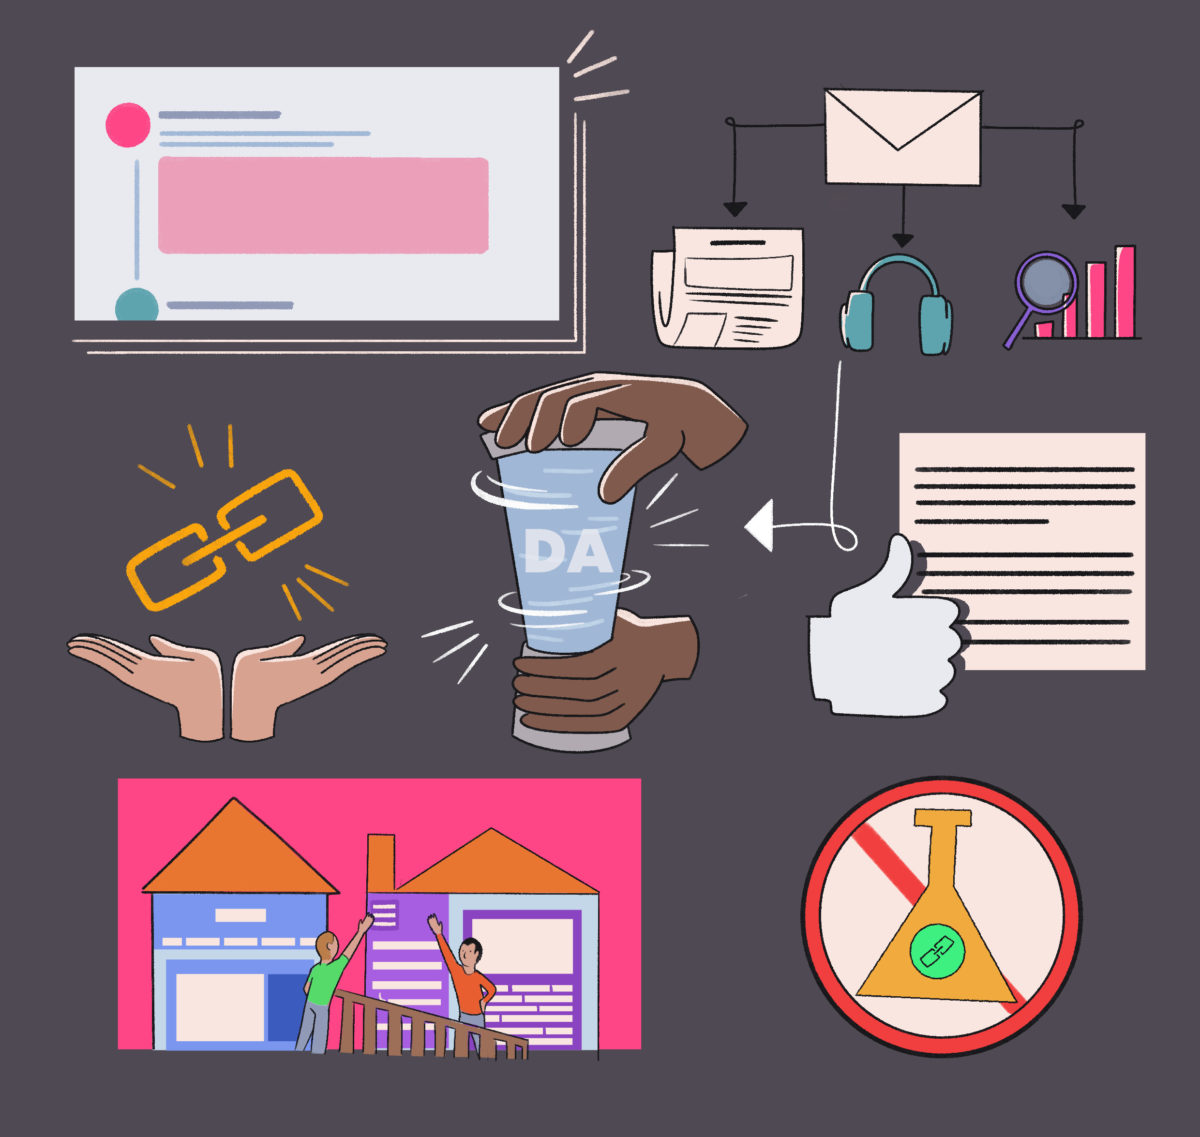 Illustration of various icons representing digital communication, data exchange, online approval, music and podcast listening, home construction, and scientific research.